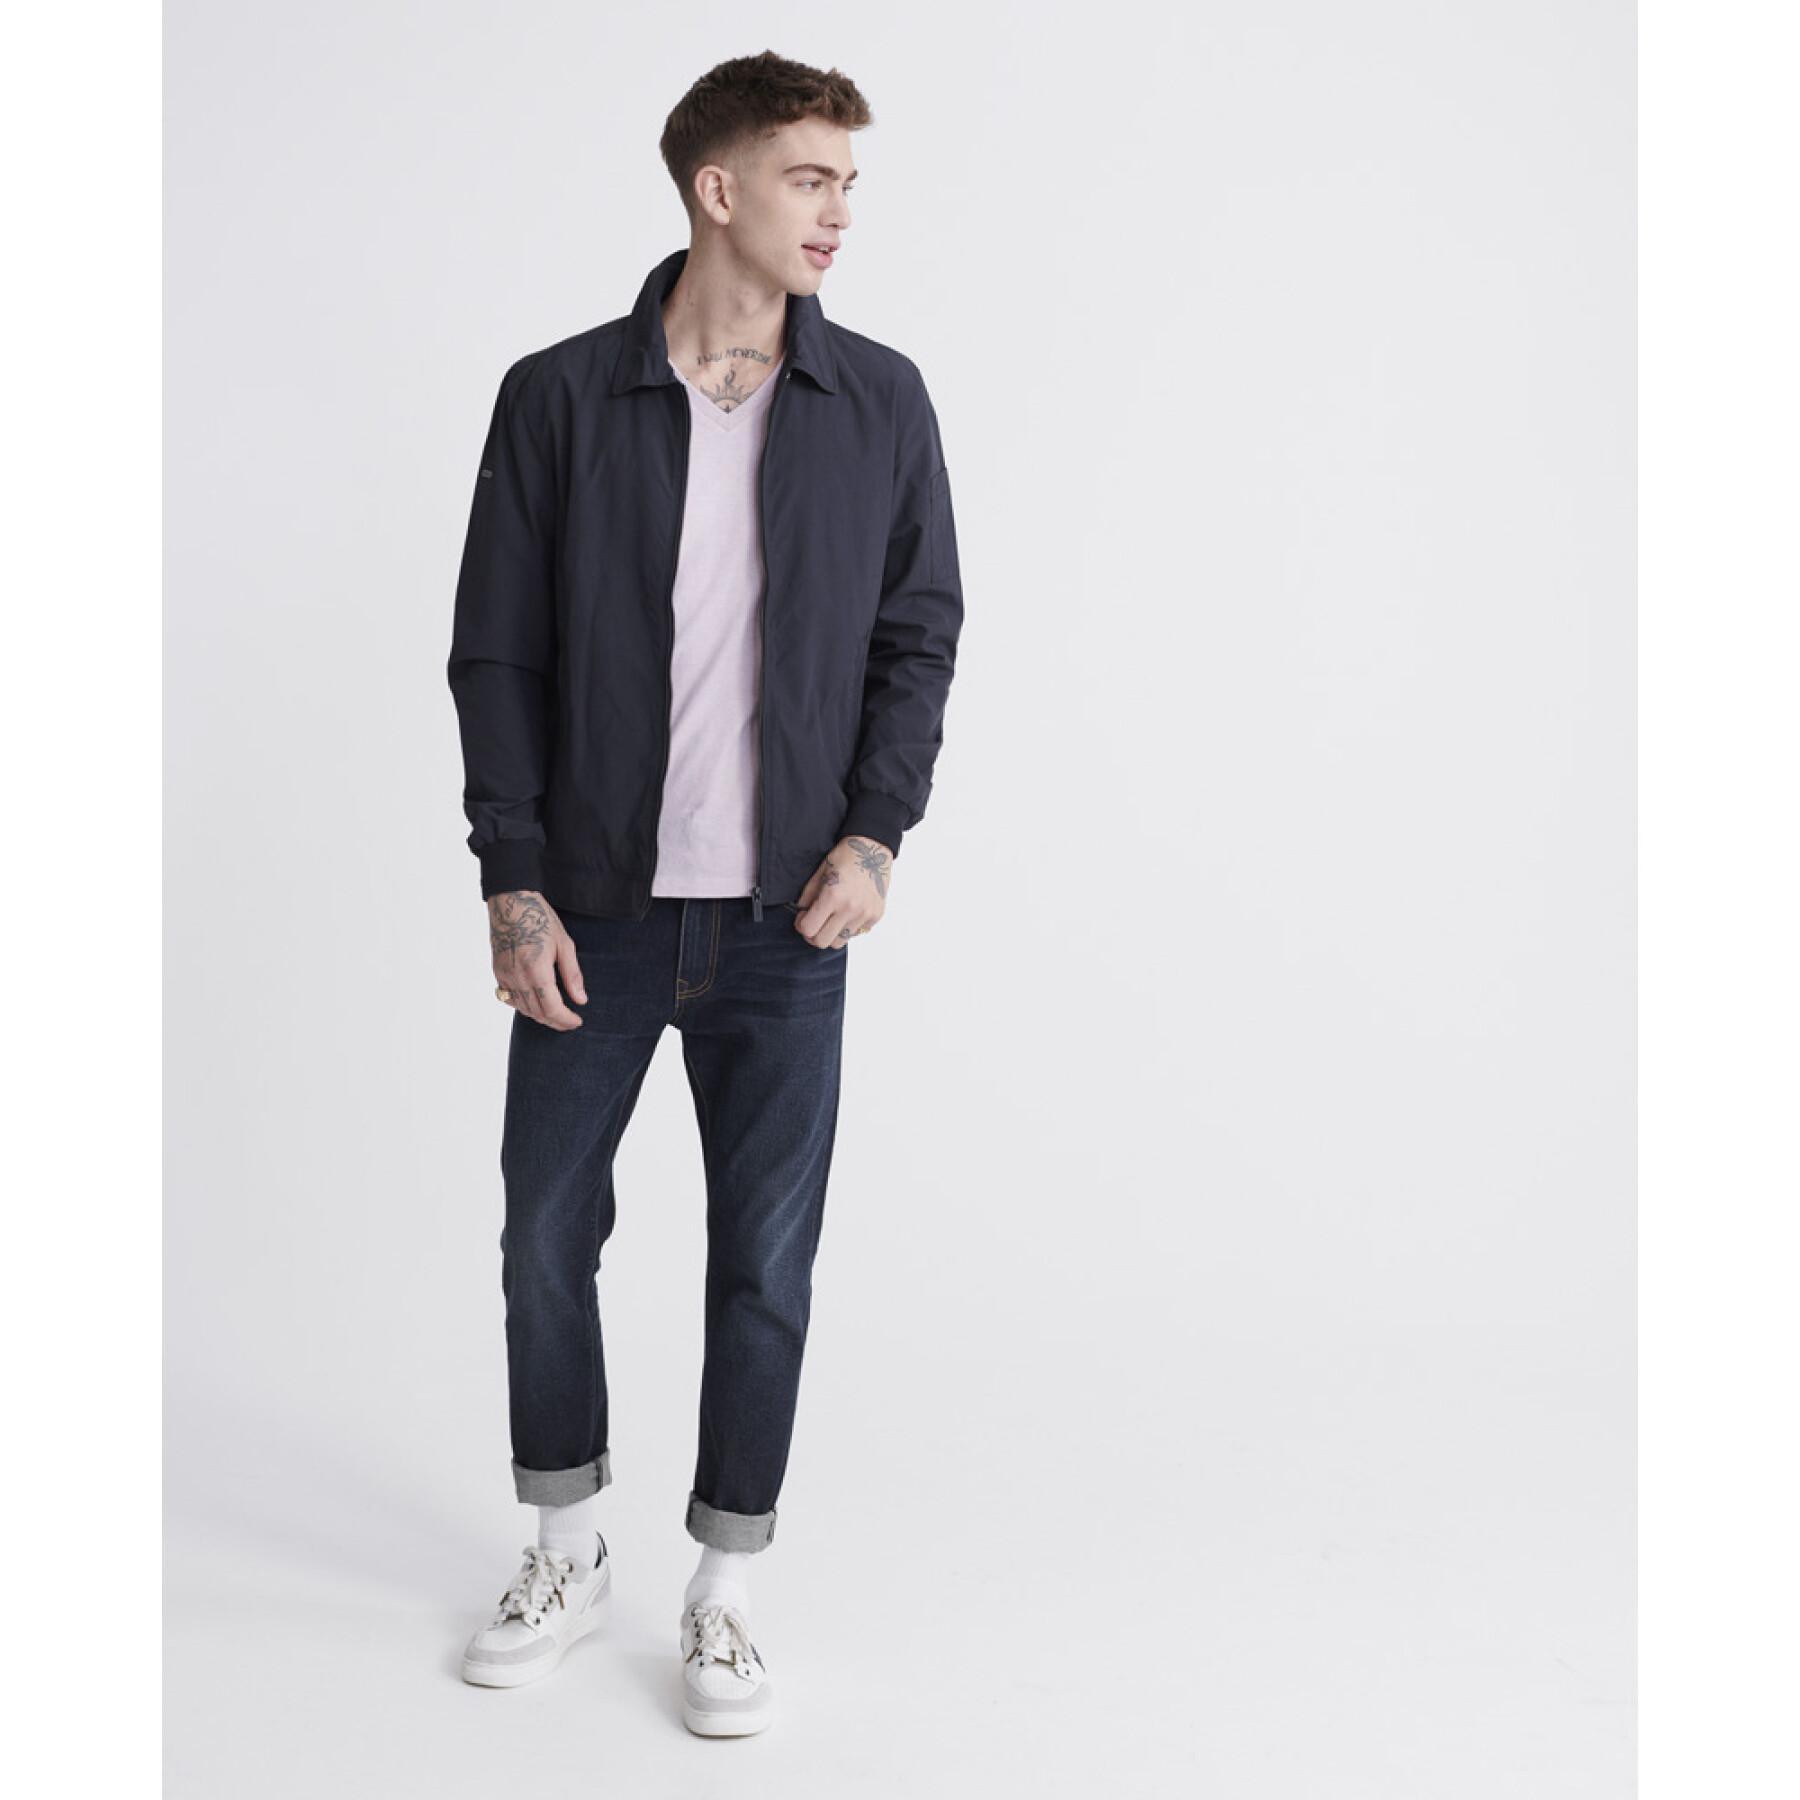 Giacca Superdry Collared Harrington